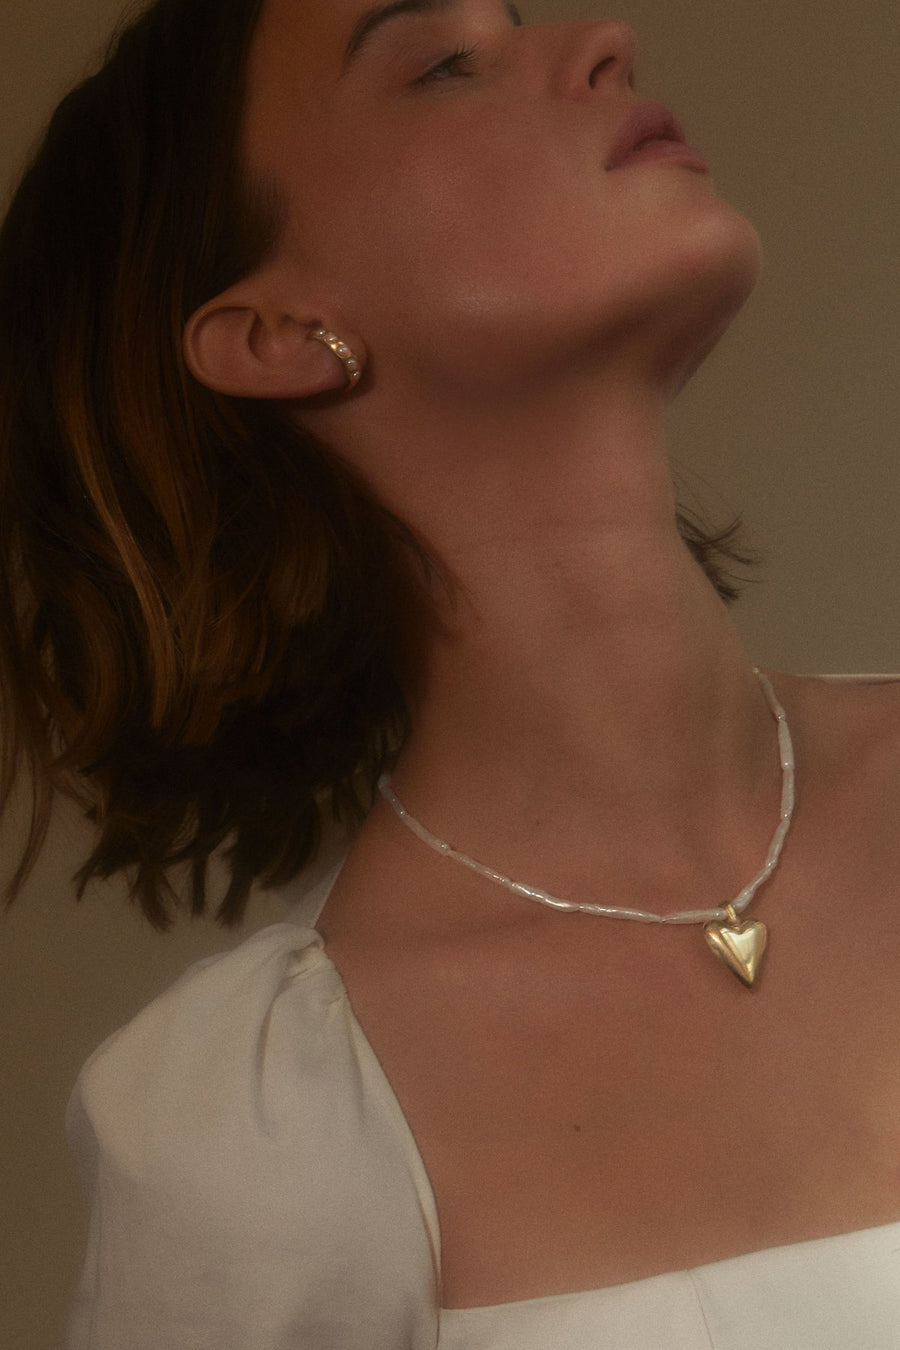 Hernan Herdez- Mar De Amore necklace-Jewellery-jewelry-Jeryco Store- London- Necklace-Pearl necklace- Toggle necklace- sustainable brand-necklaces for him- necklaces for her-necklaces that are unisex-Heart pendant necklace